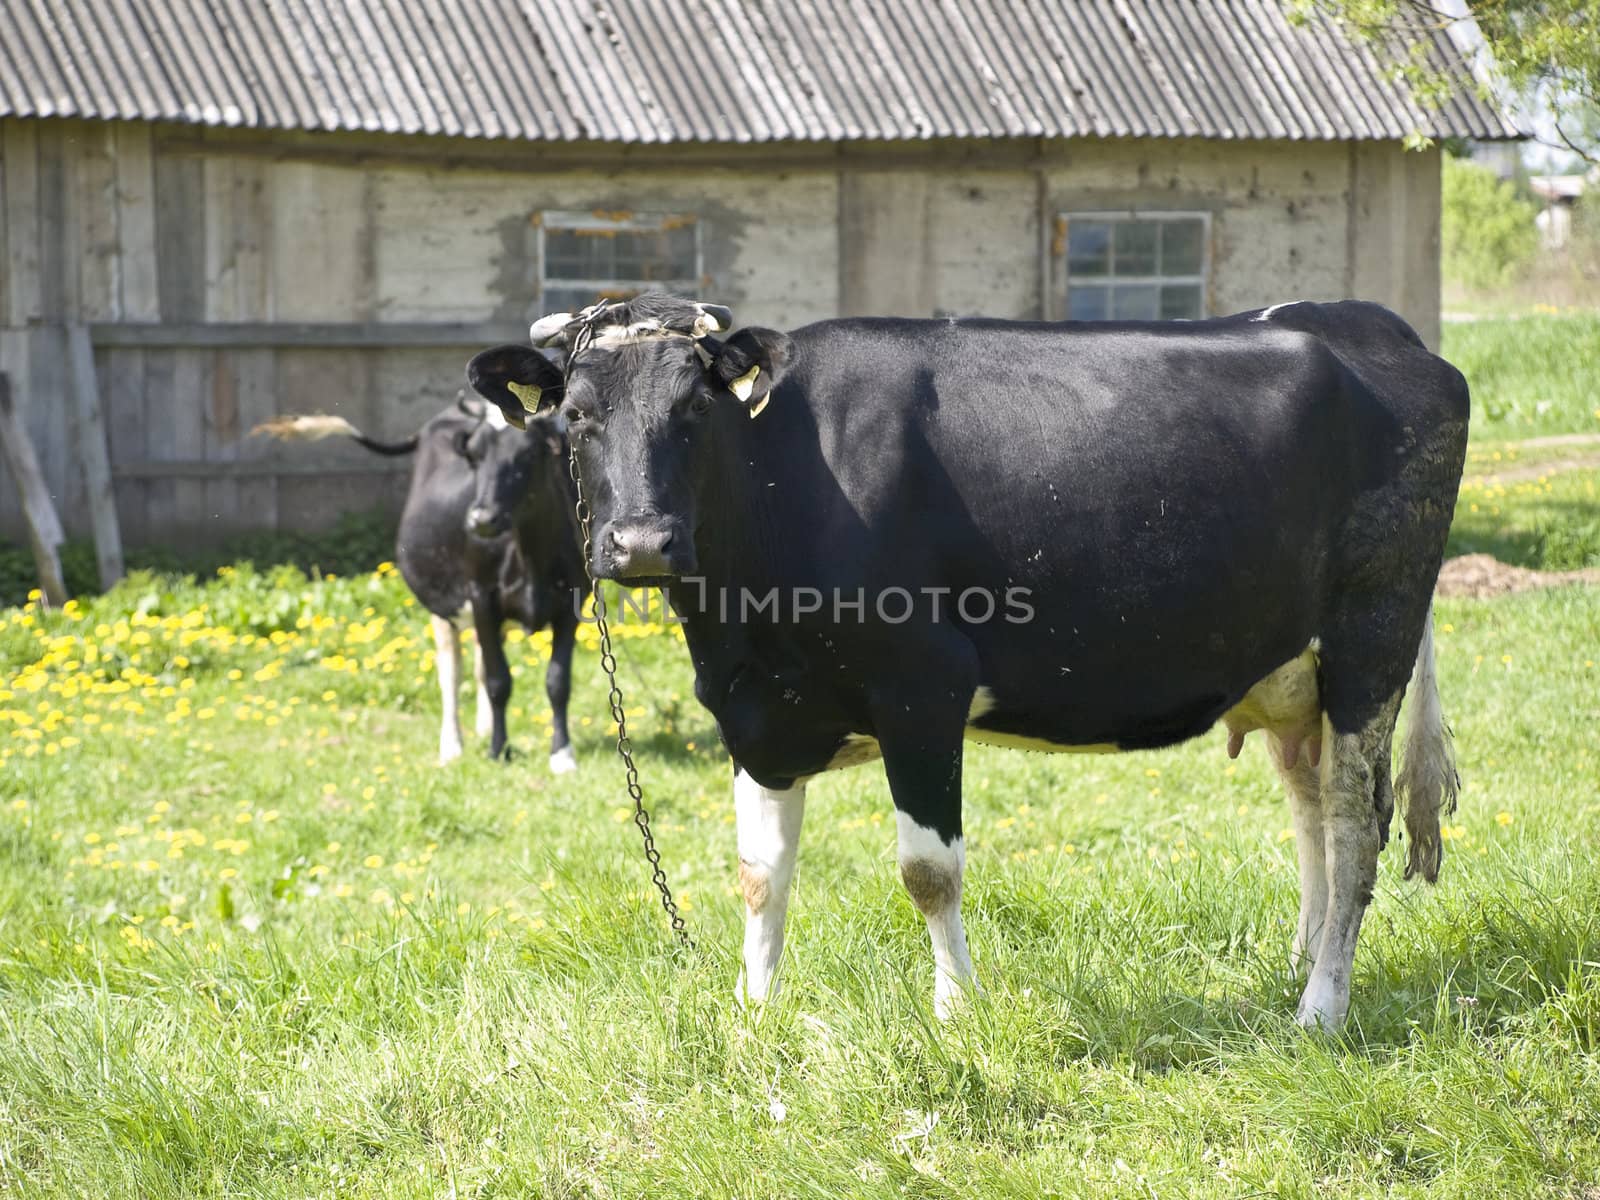 Two cows at the green grass against the old house